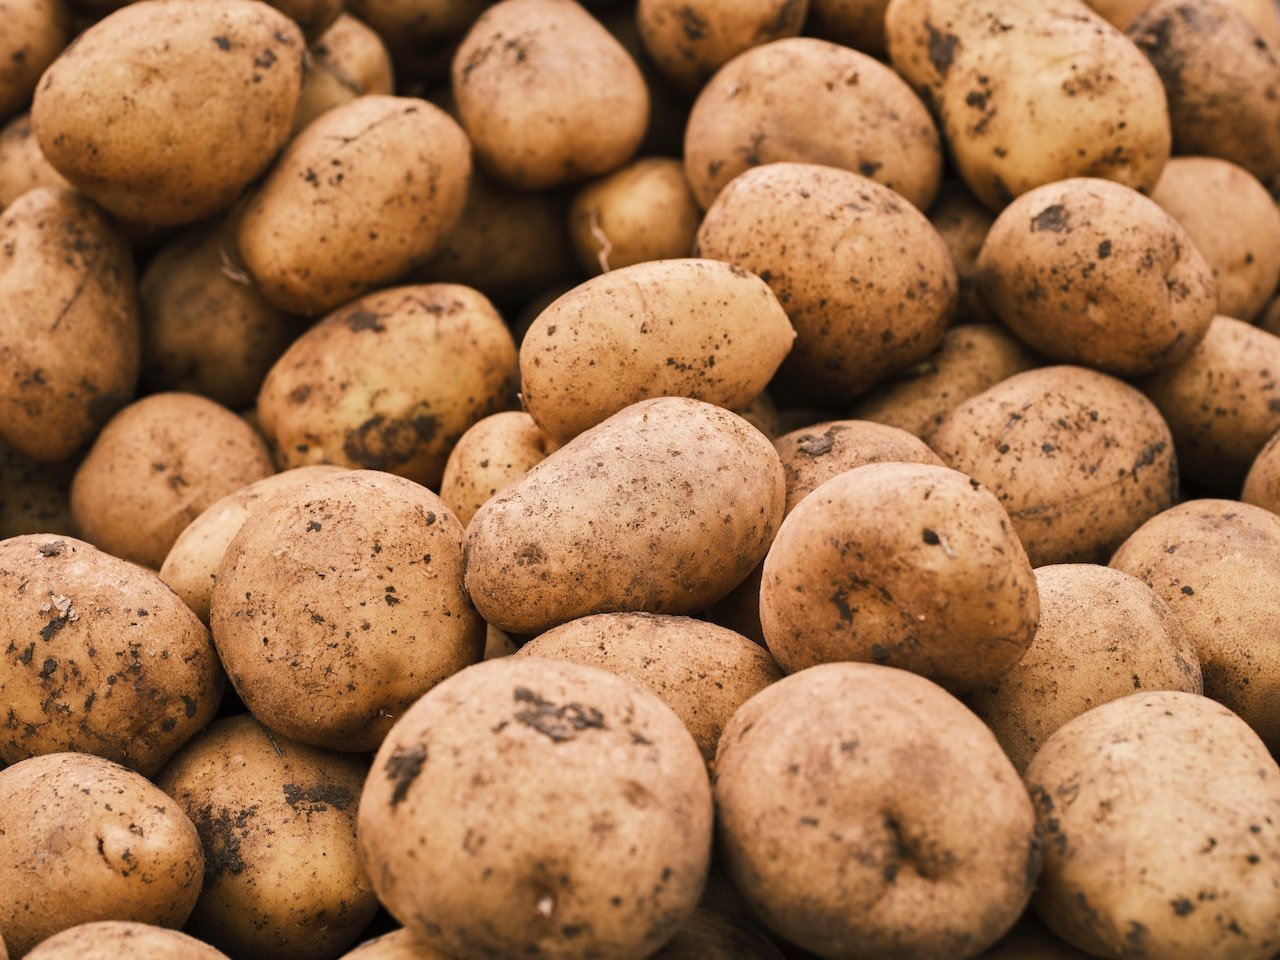 The Ultimate Guide to Storing Potatoes